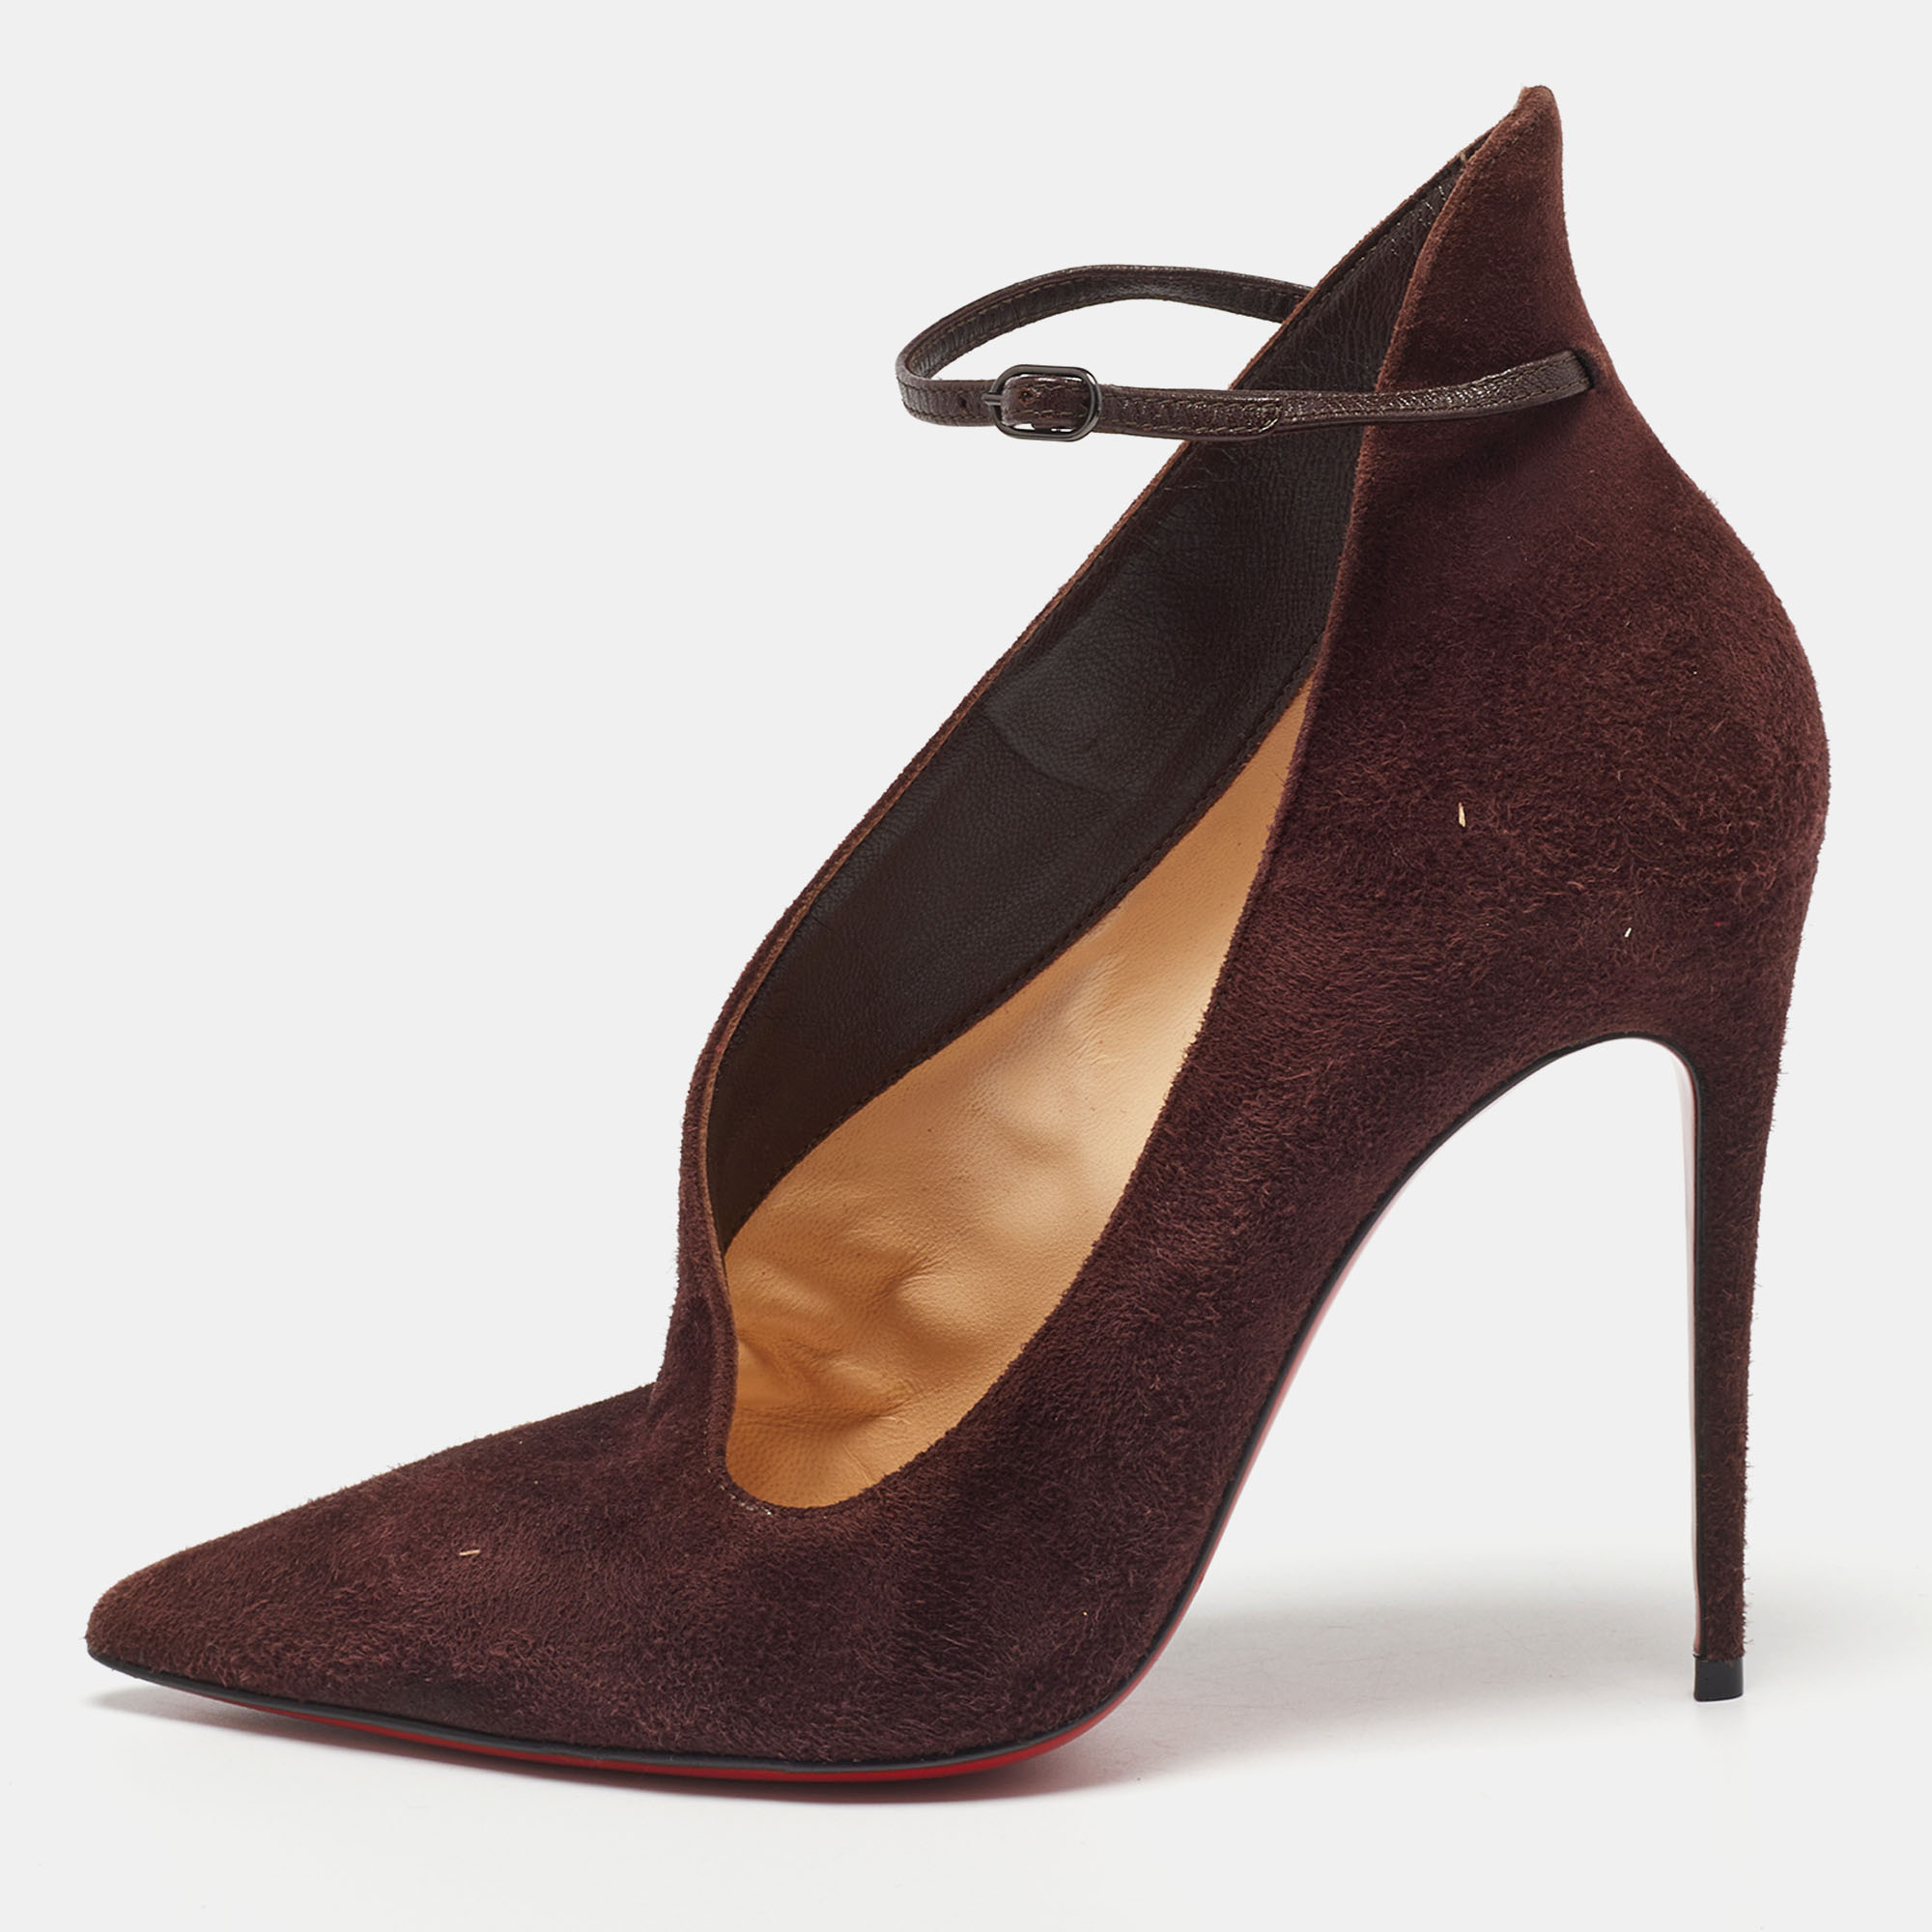 Pre-owned Christian Louboutin Dark Burgundy Suede Vampydoly Pumps Size 36